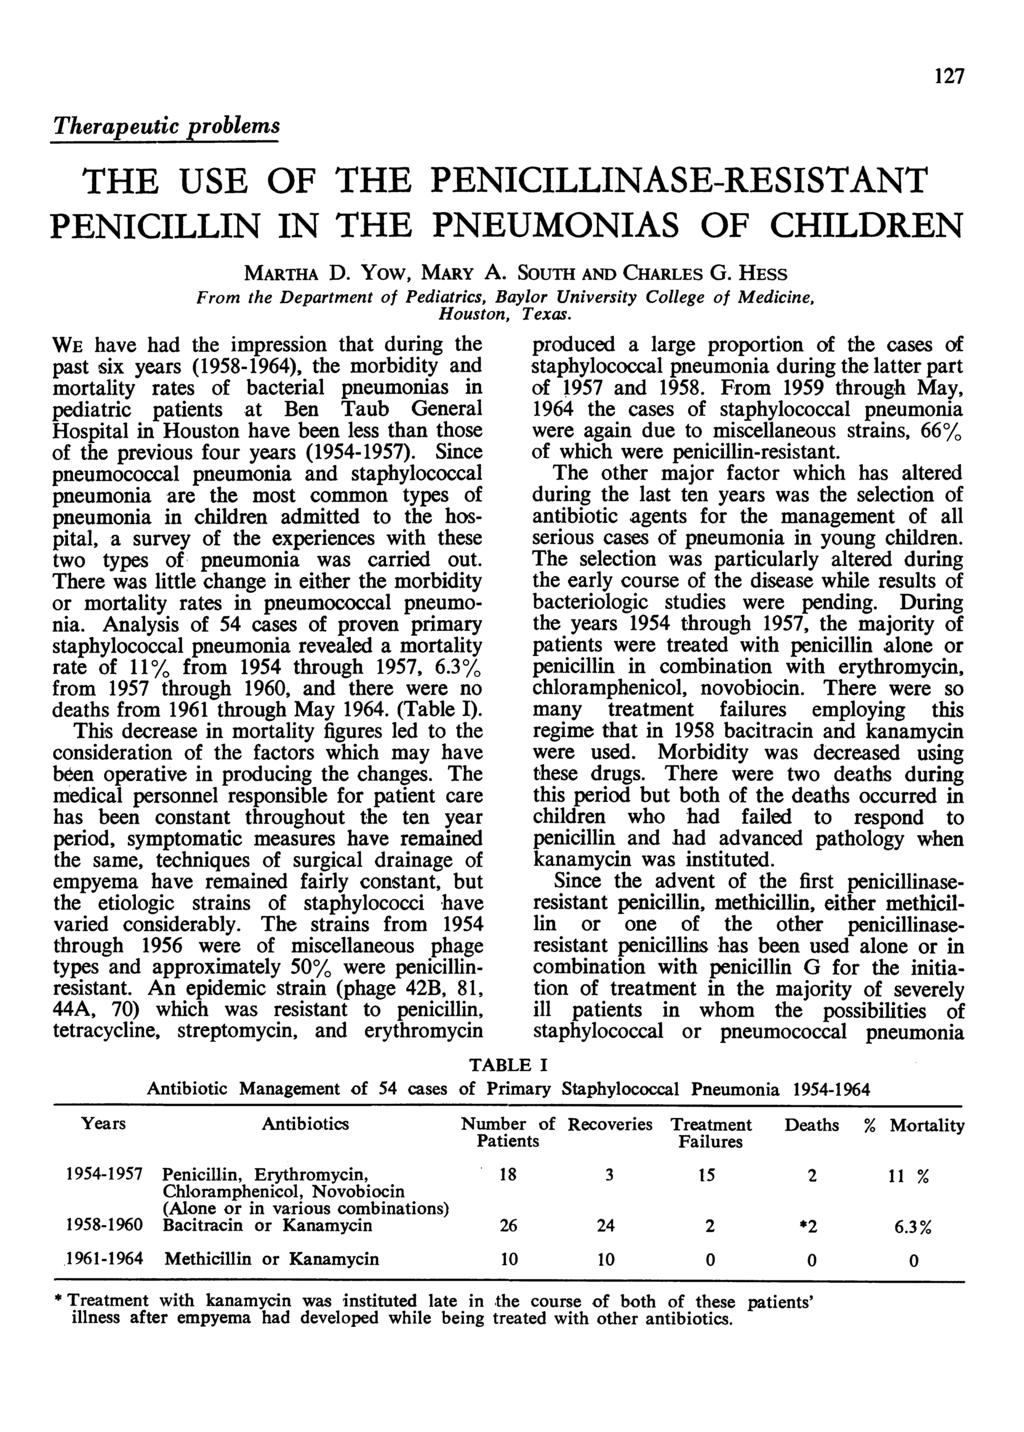 Therapeutic problems THE USE OF THE PENICILLINASE-RESISTANT PENICILLIN IN THE PNEUMONIAS OF CHILDREN MARTHA D. Yow, MARY A. SOUTH AND CHARLES G.